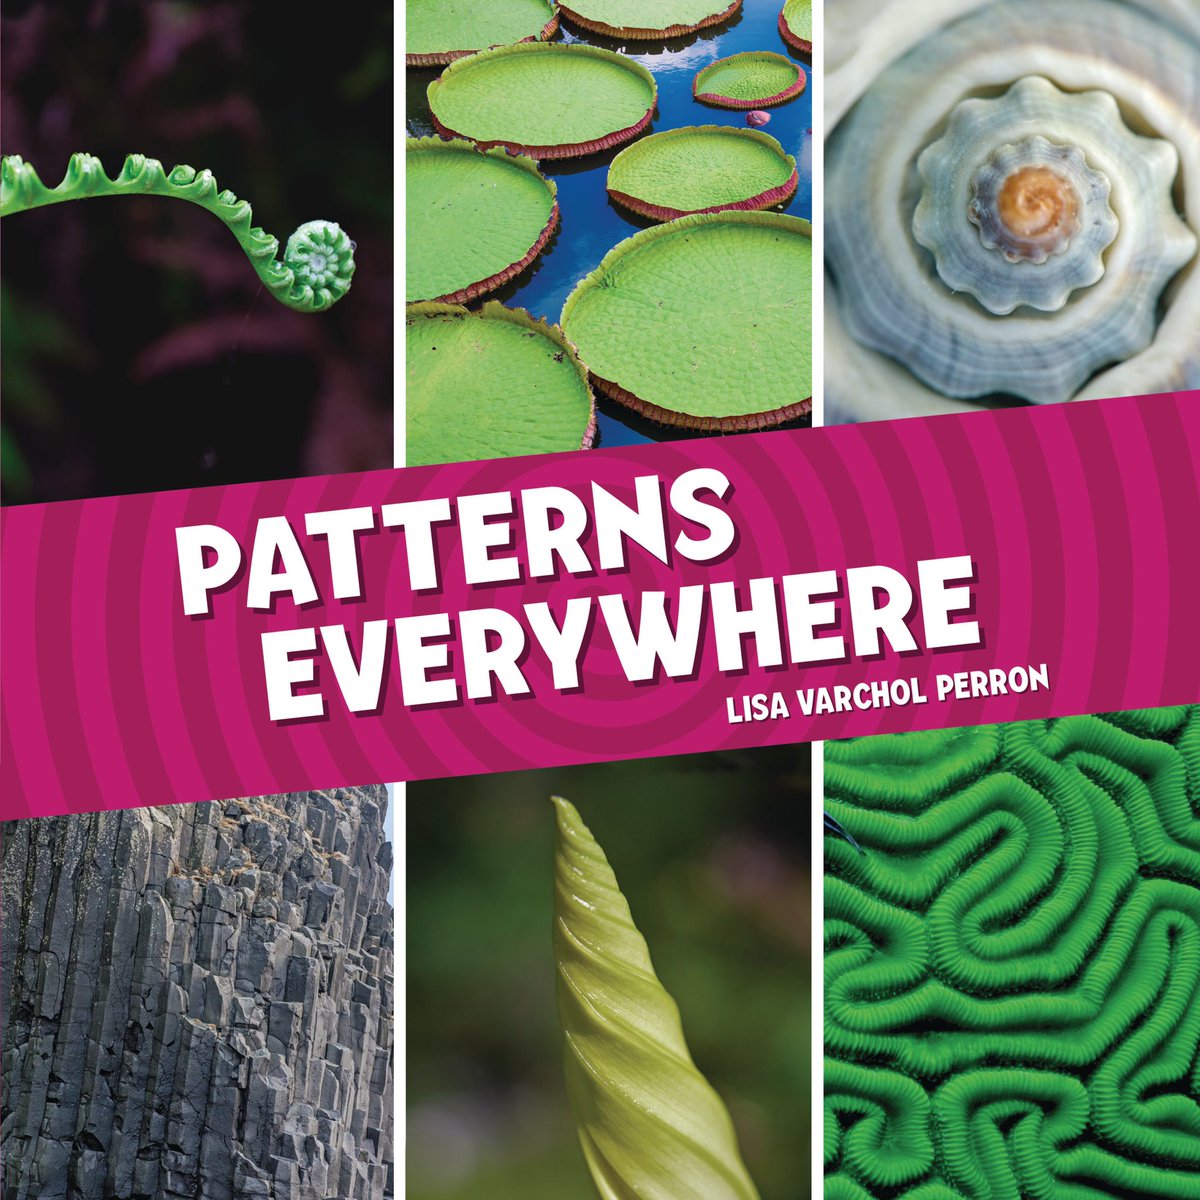 In honor of #TeacherAppreciationWeek, I’m giving away two signed copies of PATTERNS EVERYWHERE! If you’re a teacher or work in another capacity at a school, just comment here by 5/14 to enter! #bookgiveaway @LernerBooks